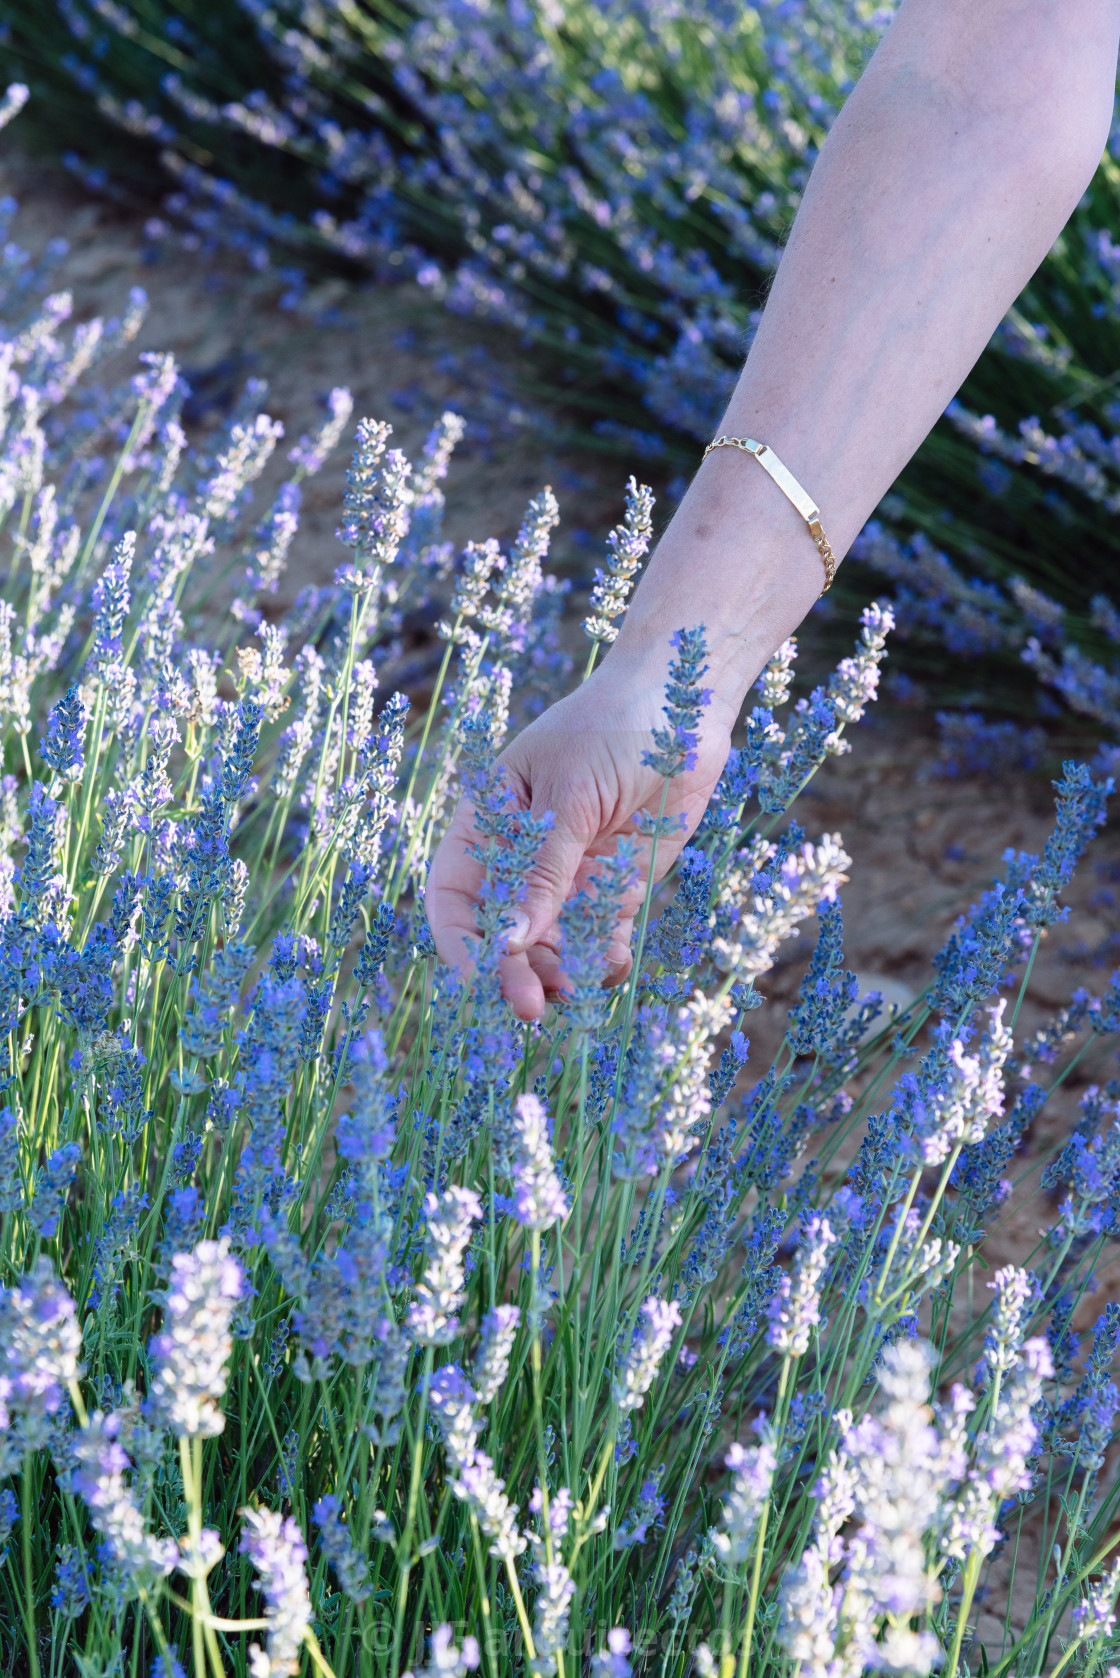 "Woman hand touching beautiful flowers of lavender" stock image